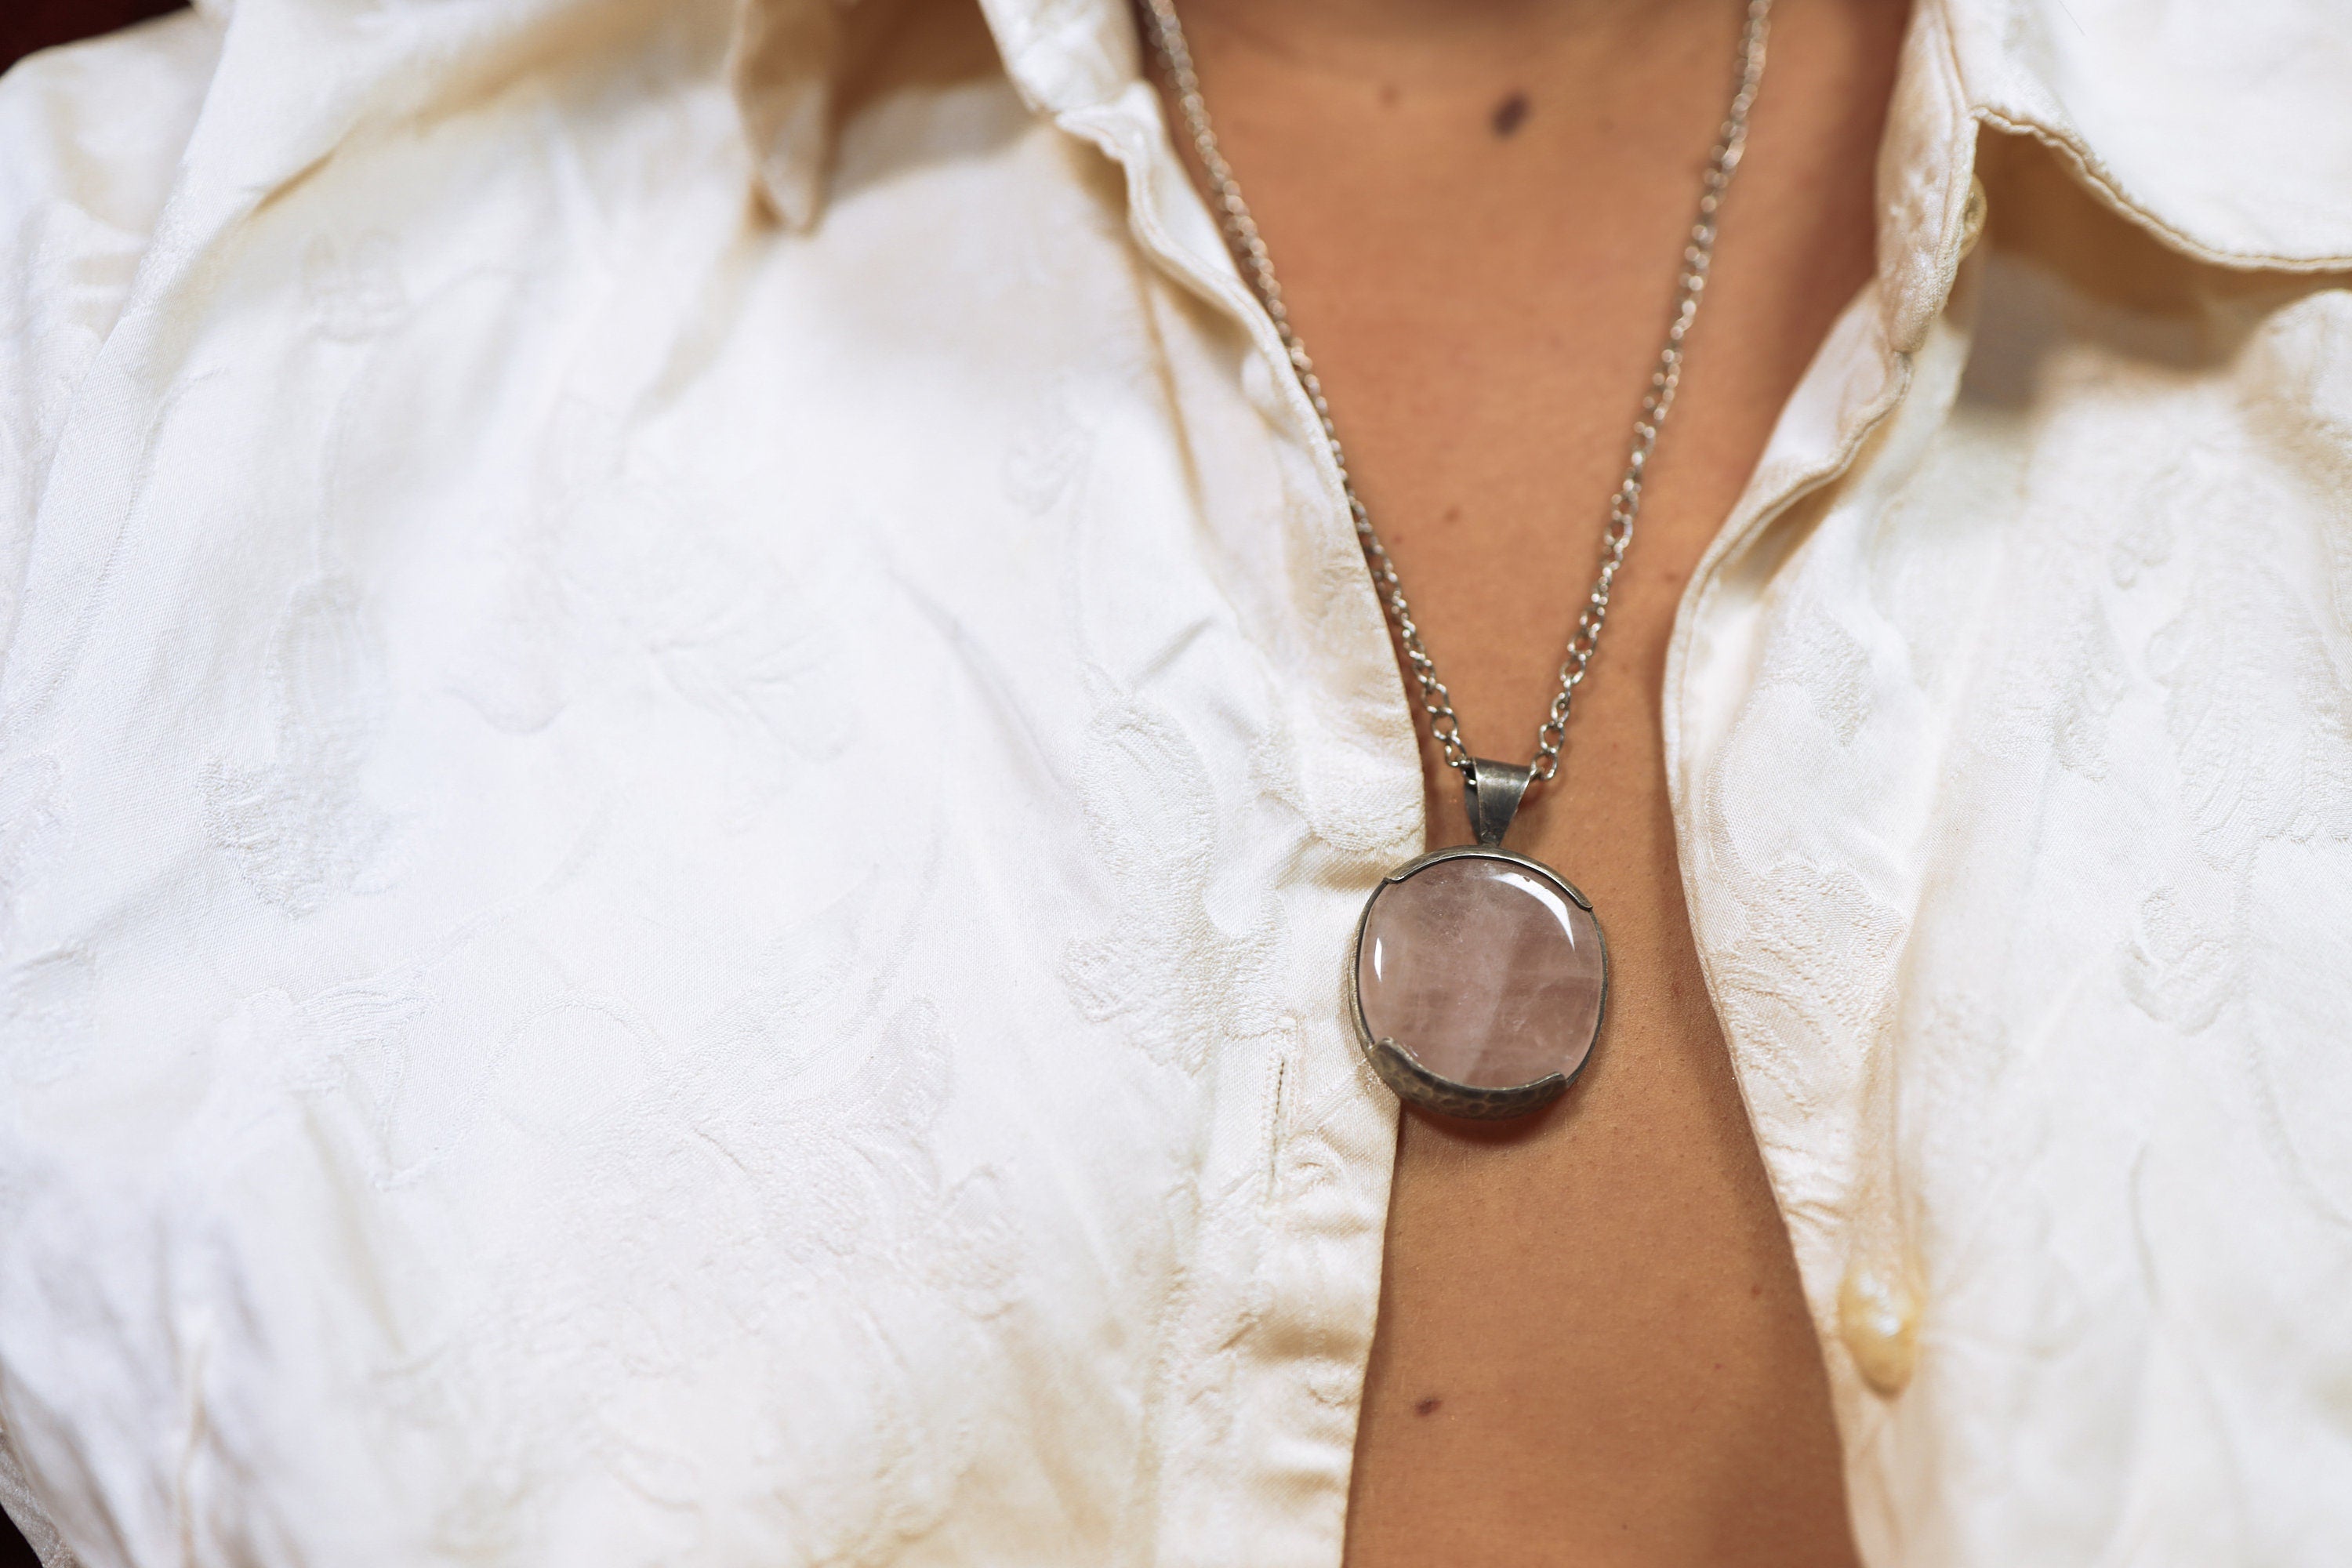 One Organic Shaped Rose Quartz - Crystal Pendant Necklace - 925 Sterling Silver - Strong hammered & textured finish